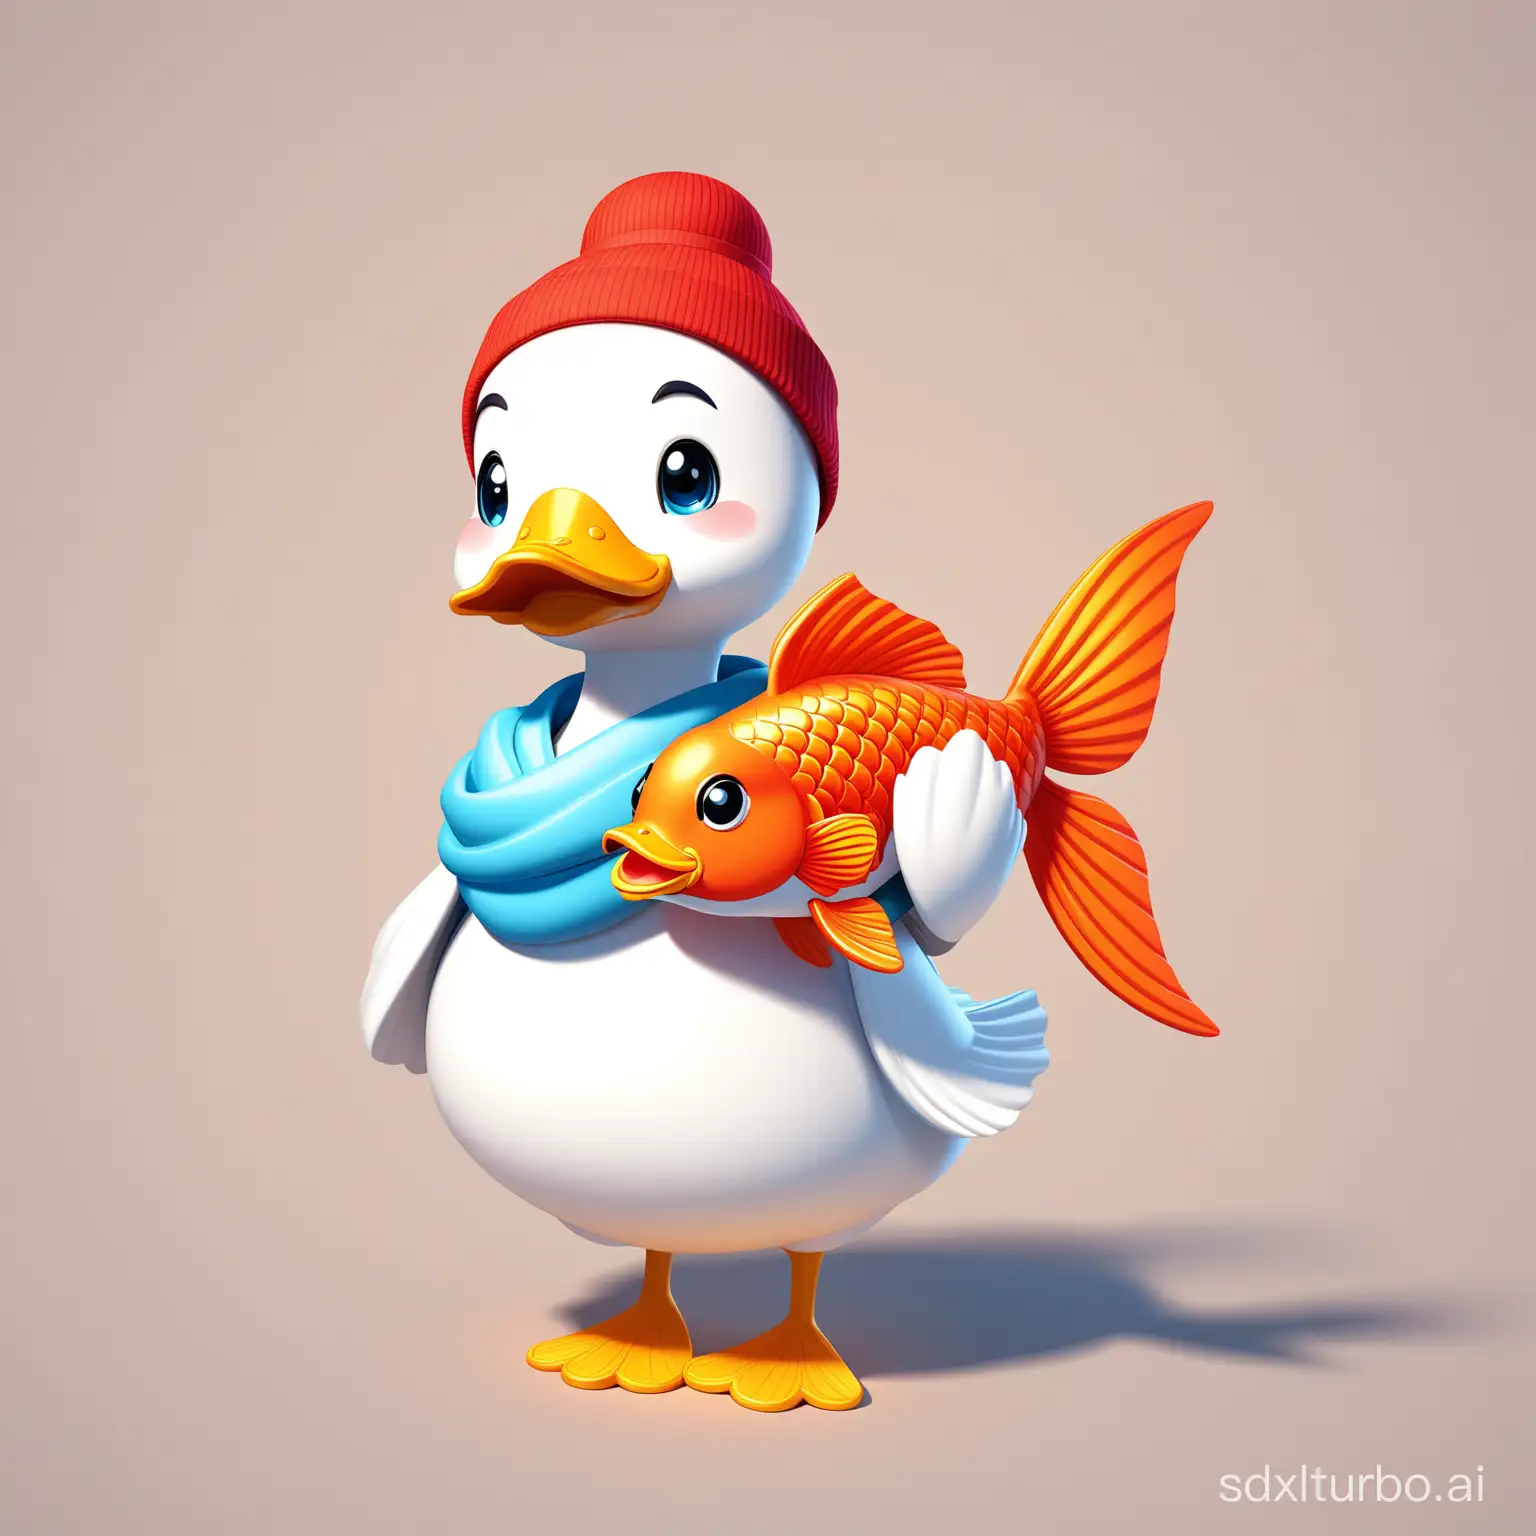 A white duck, holding a toy resembling a Chinese koi fish, cute, casual clothing, 3D Disney style